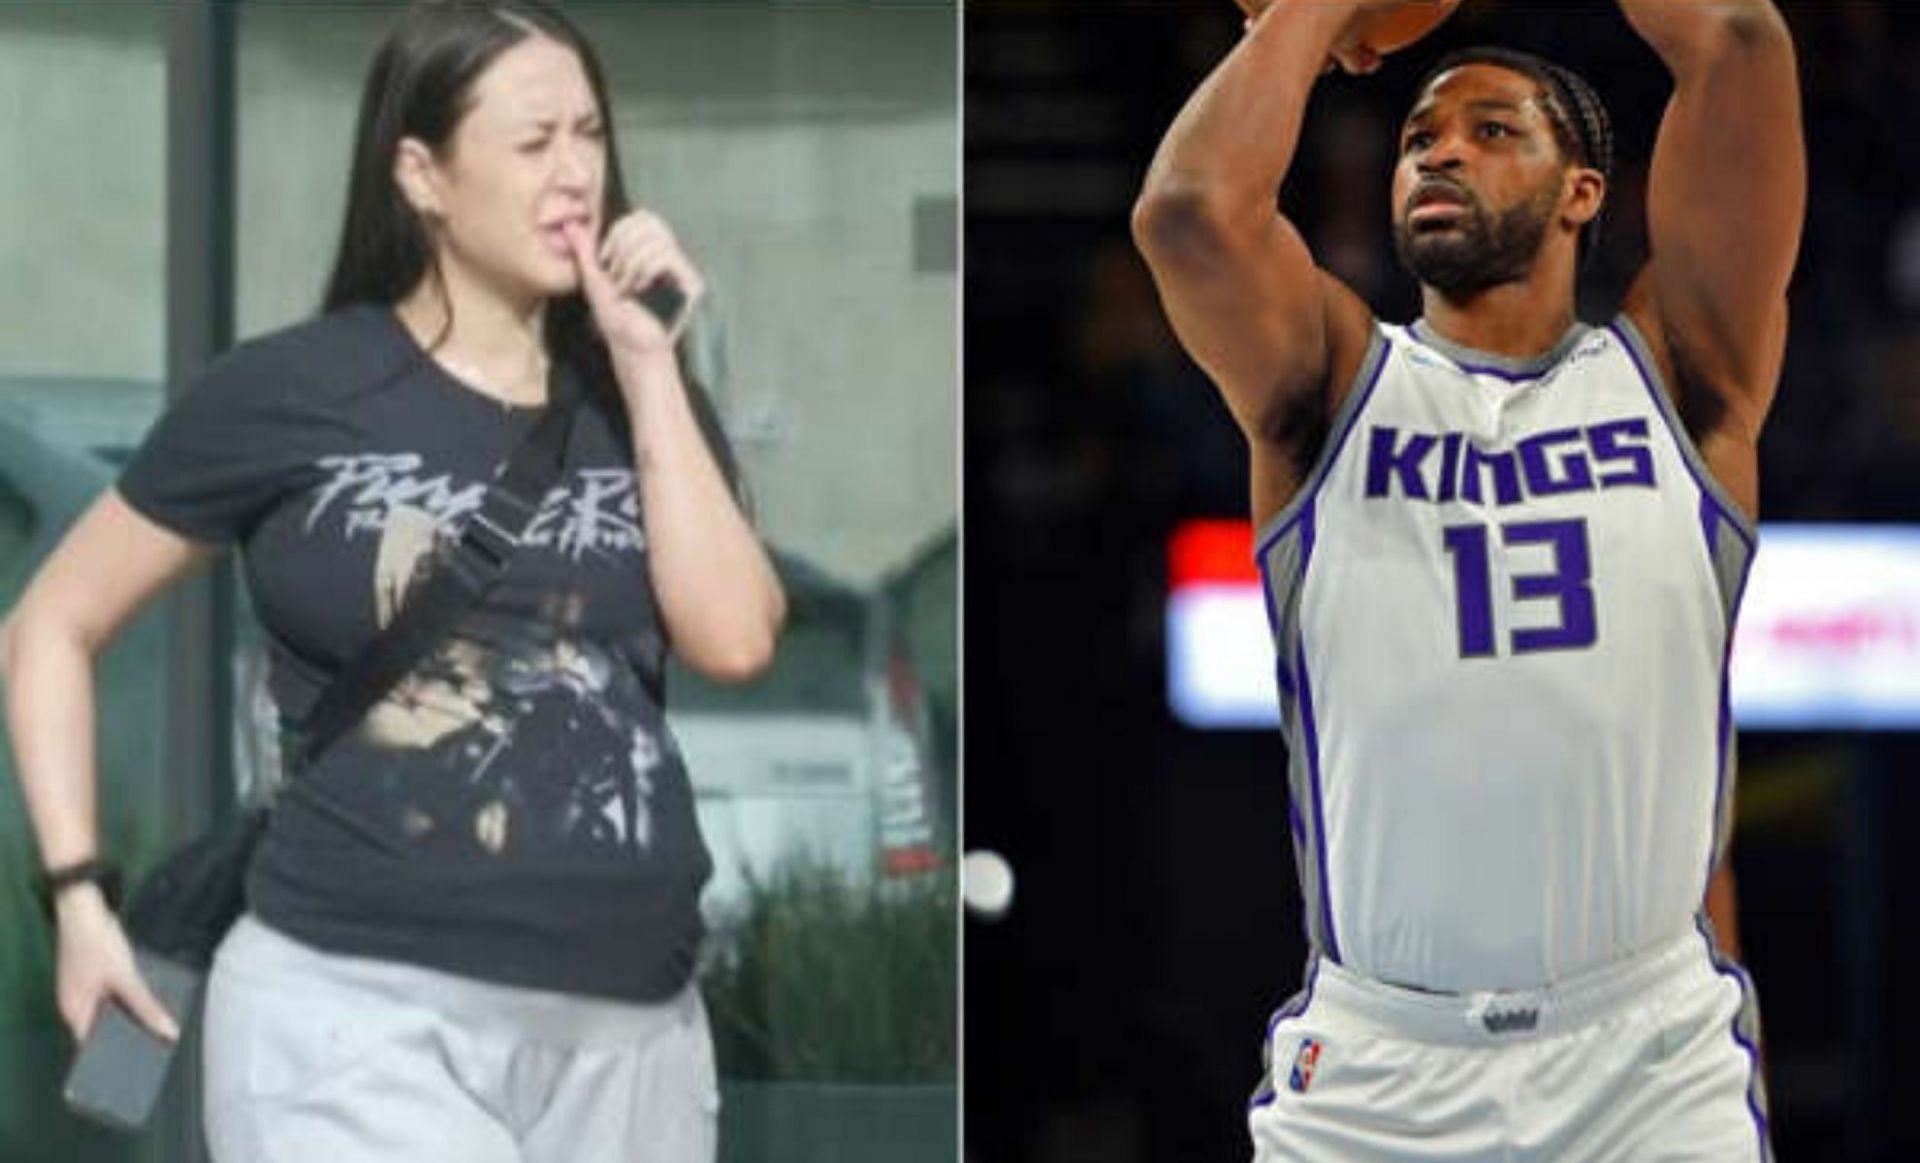 Heavily pregnant Maralee Nichols takes a walk outside in Marina Del Rey area in Los Angeles (L), Tristan Thompson during a match (R) (Image via mnm.com)